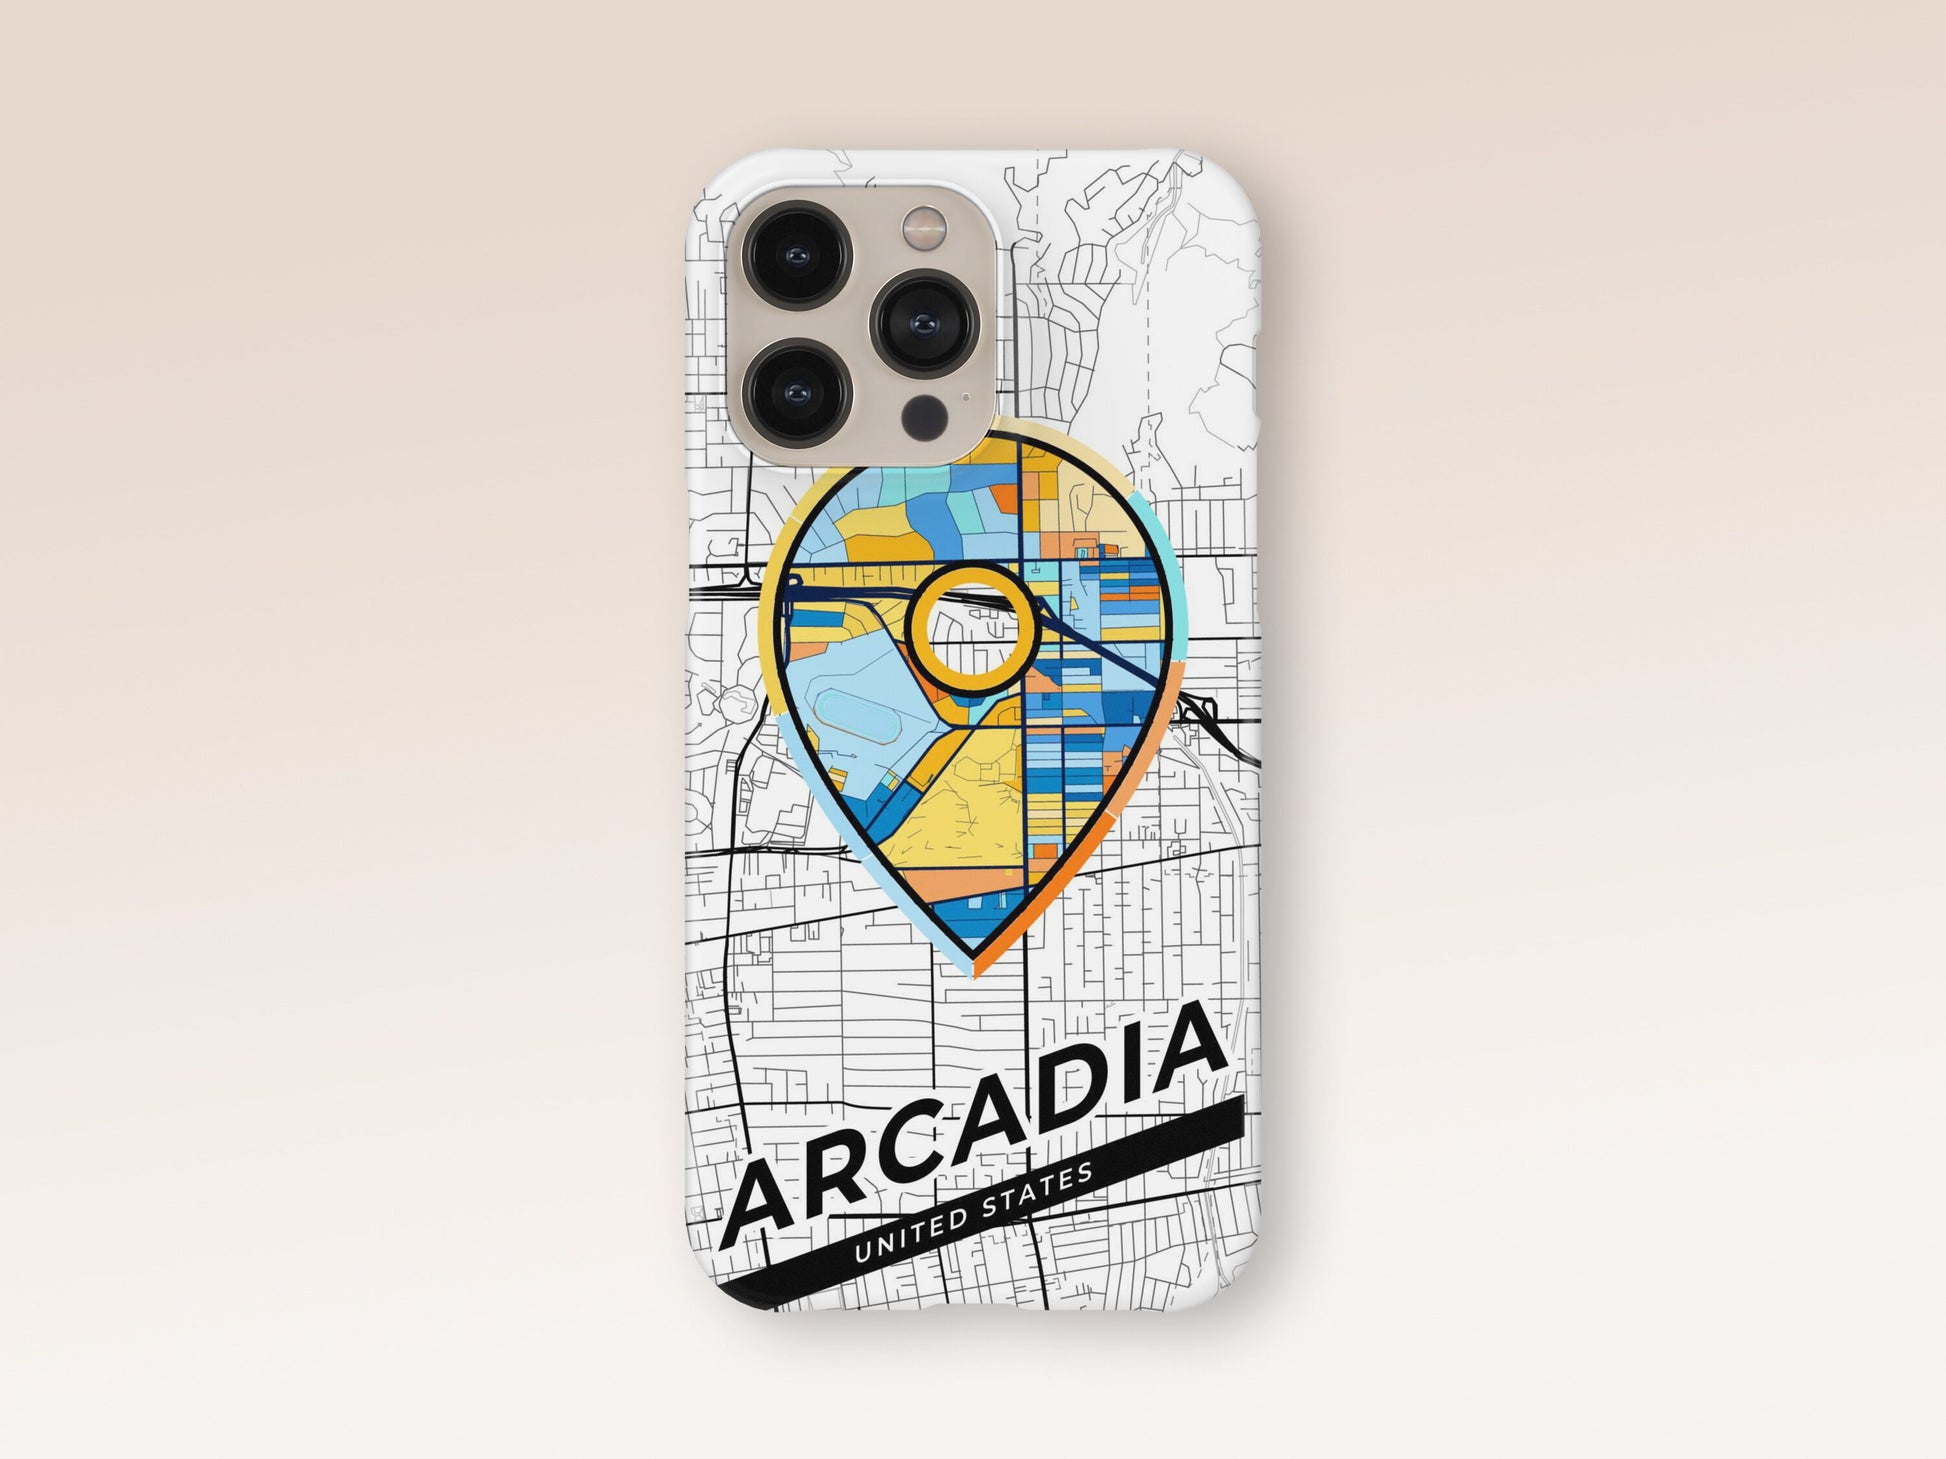 Arcadia California slim phone case with colorful icon. Birthday, wedding or housewarming gift. Couple match cases. 1